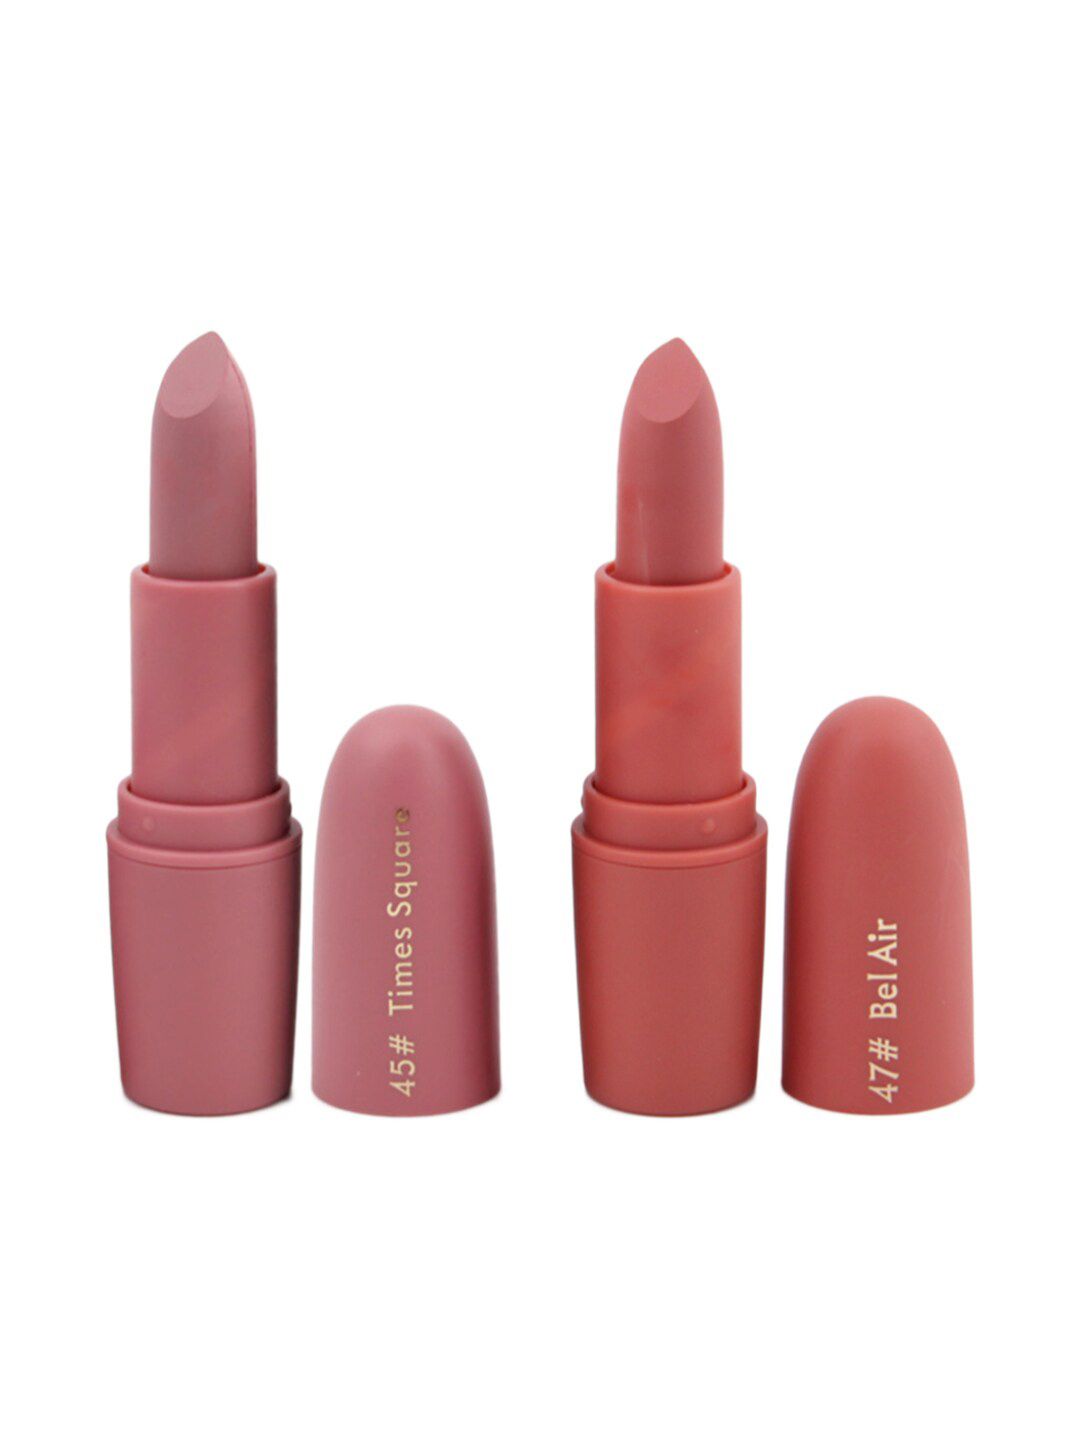 MISS ROSE Set of 2 Matte Creamy Lipsticks - Bel Air 47 & Times Square 45 Price in India